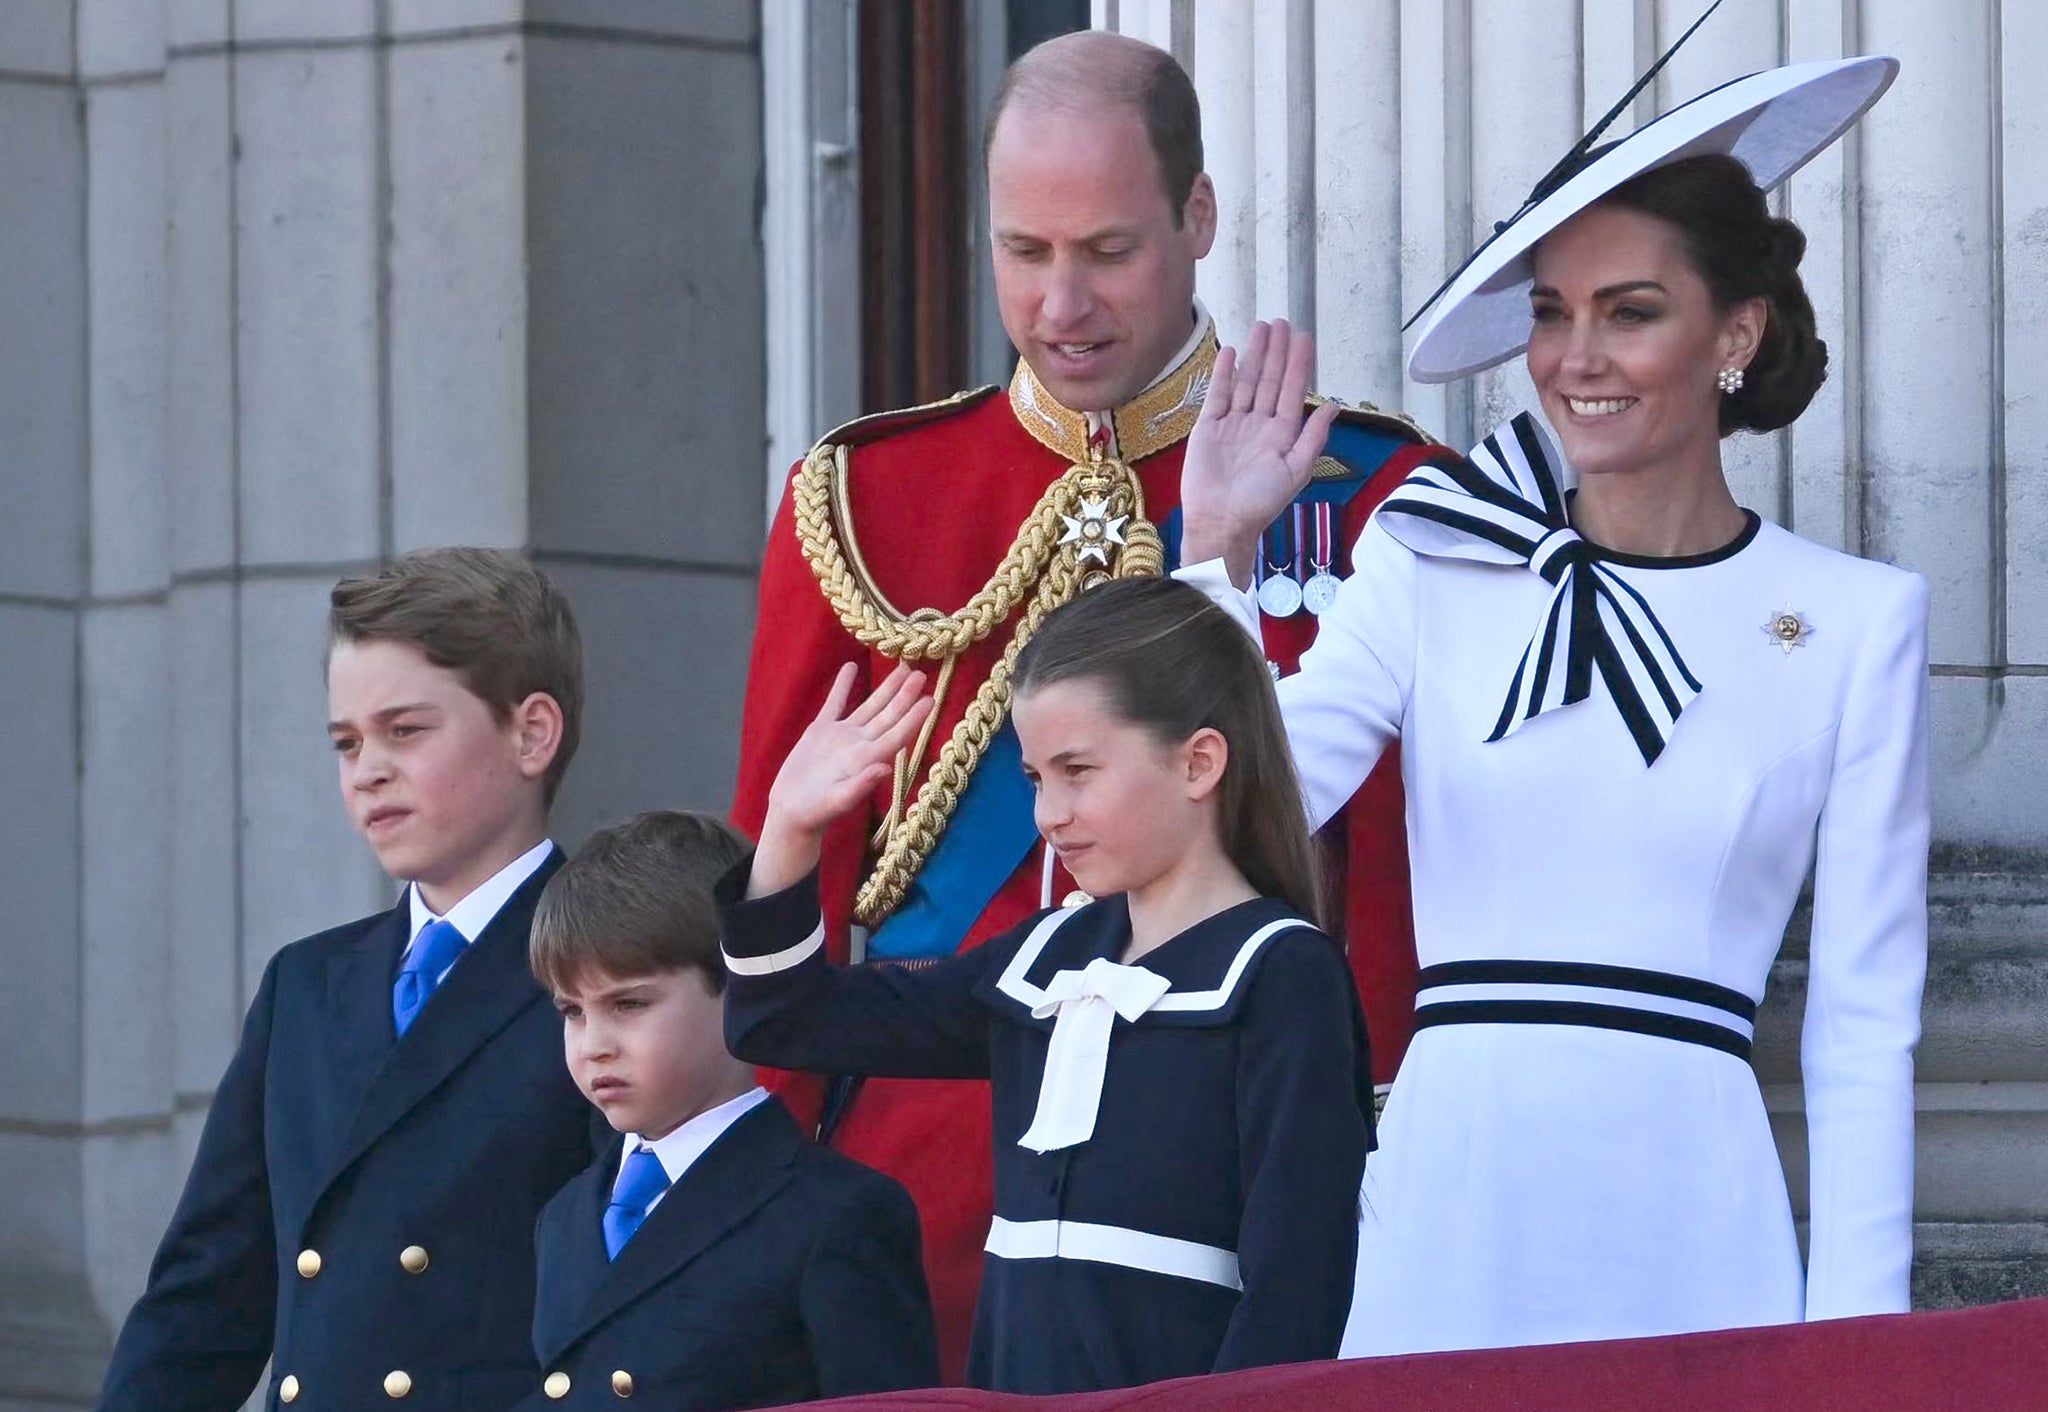 Kate Middleton appeared for the first time this year at last week’s Trooping the Colour